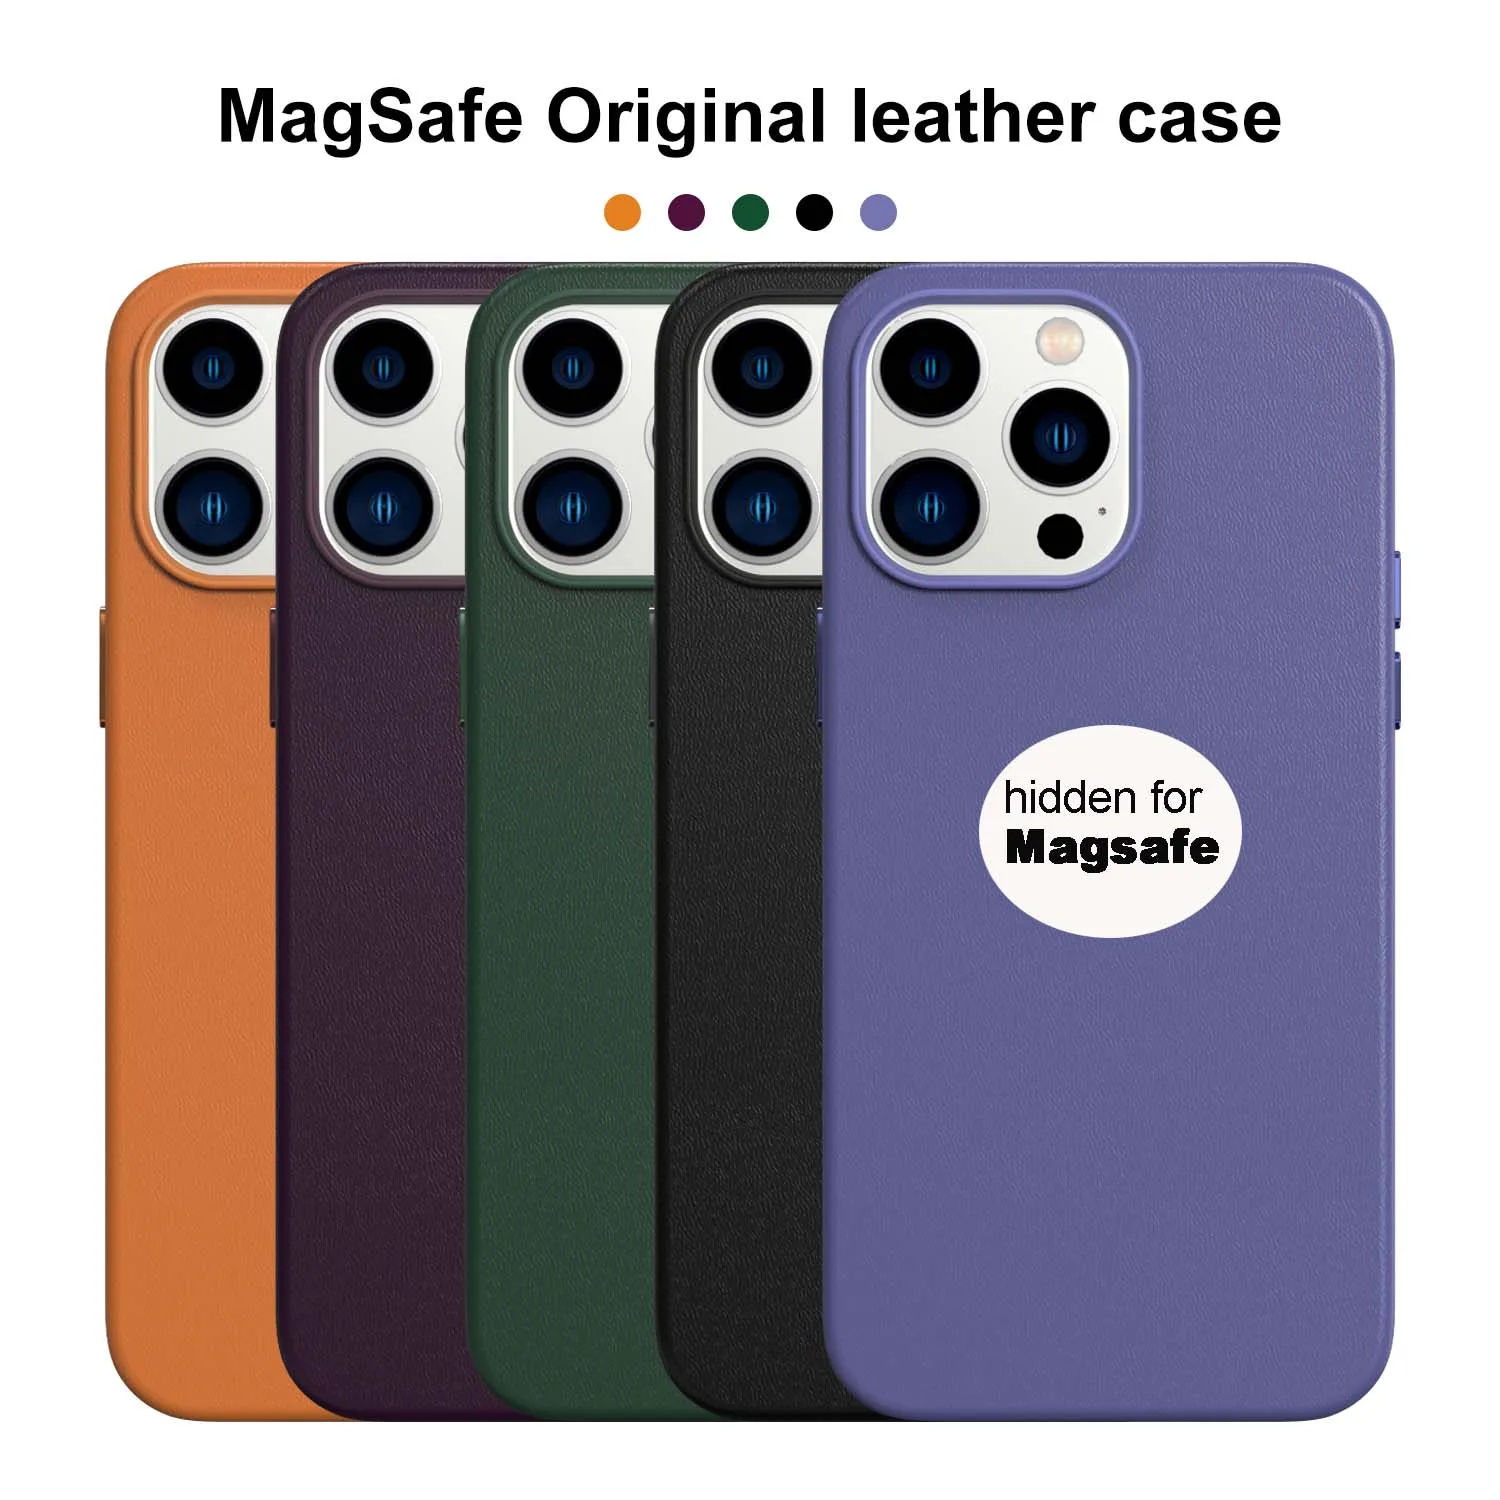 

Luxury Original Leather Case For iPhone 14 13 12 Pro Max Animation Pop Up Window For Magsafe Wireless Charging Cover Shockproof